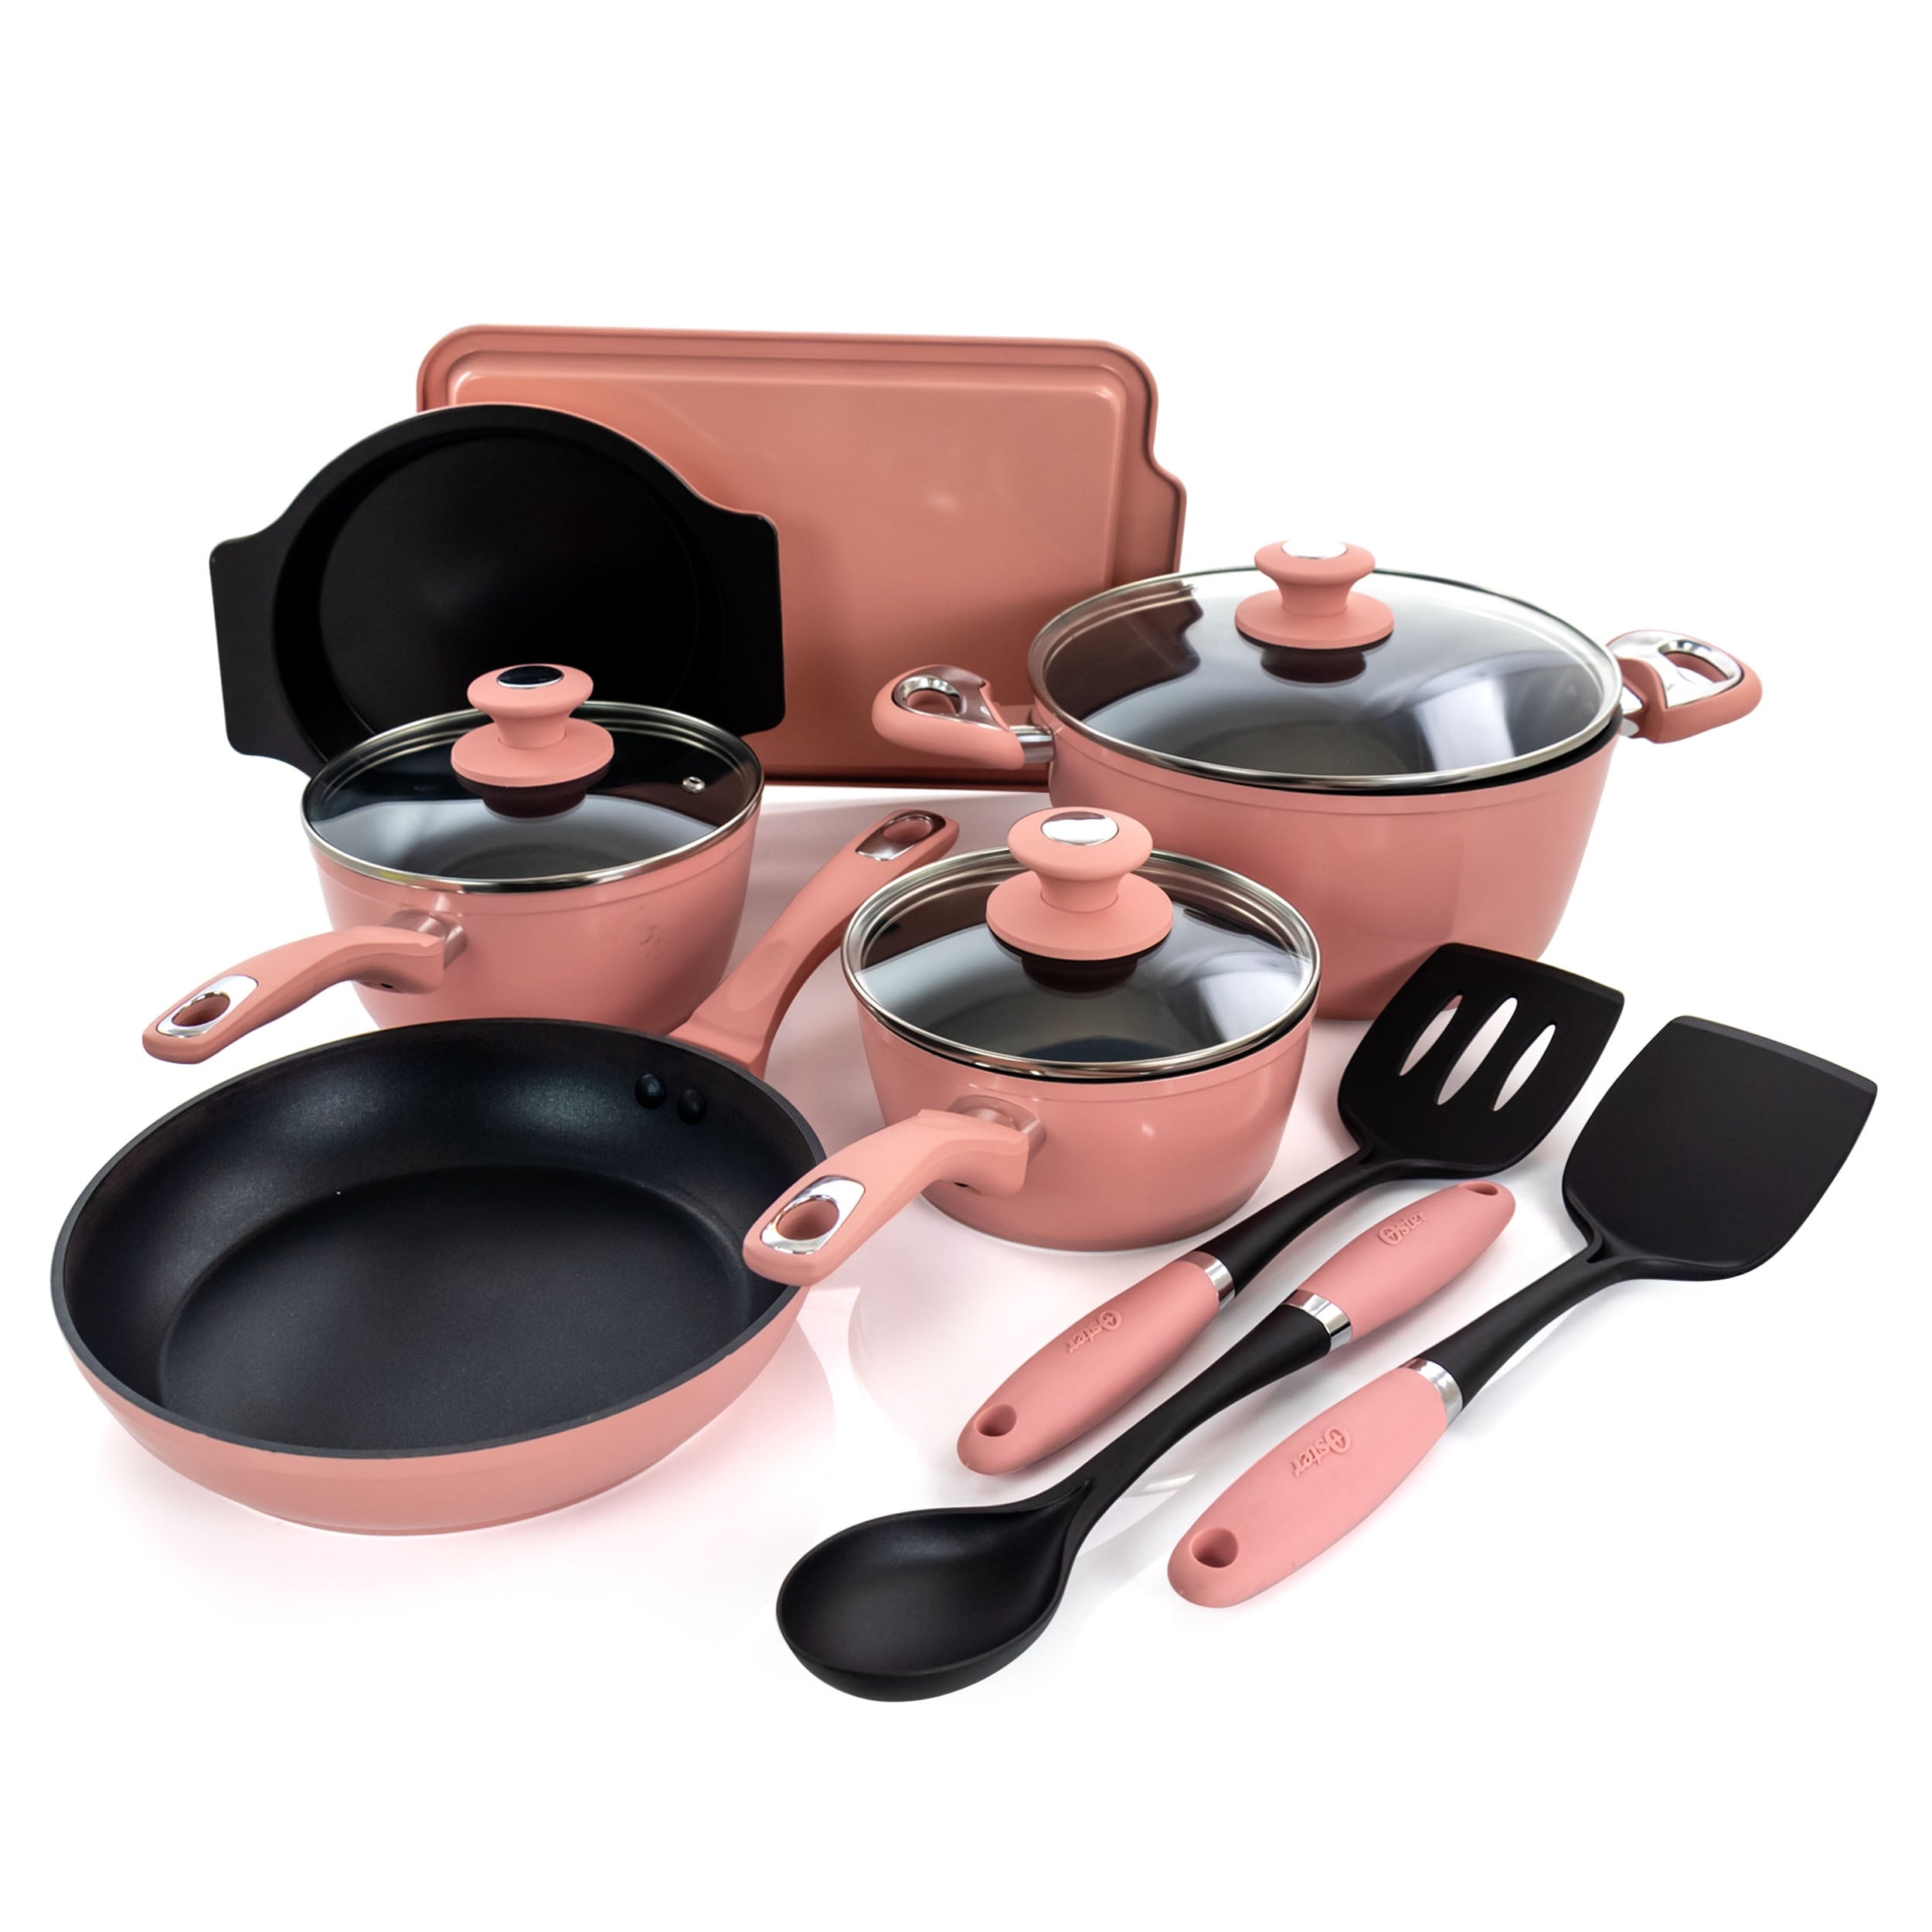 https://ak1.ostkcdn.com/images/products/is/images/direct/340df3d0cac2f894c18f1772b6919333fa7decf6/12-Piece-Nonstick-Aluminum-Cookware-Set-in-Salmon.jpg